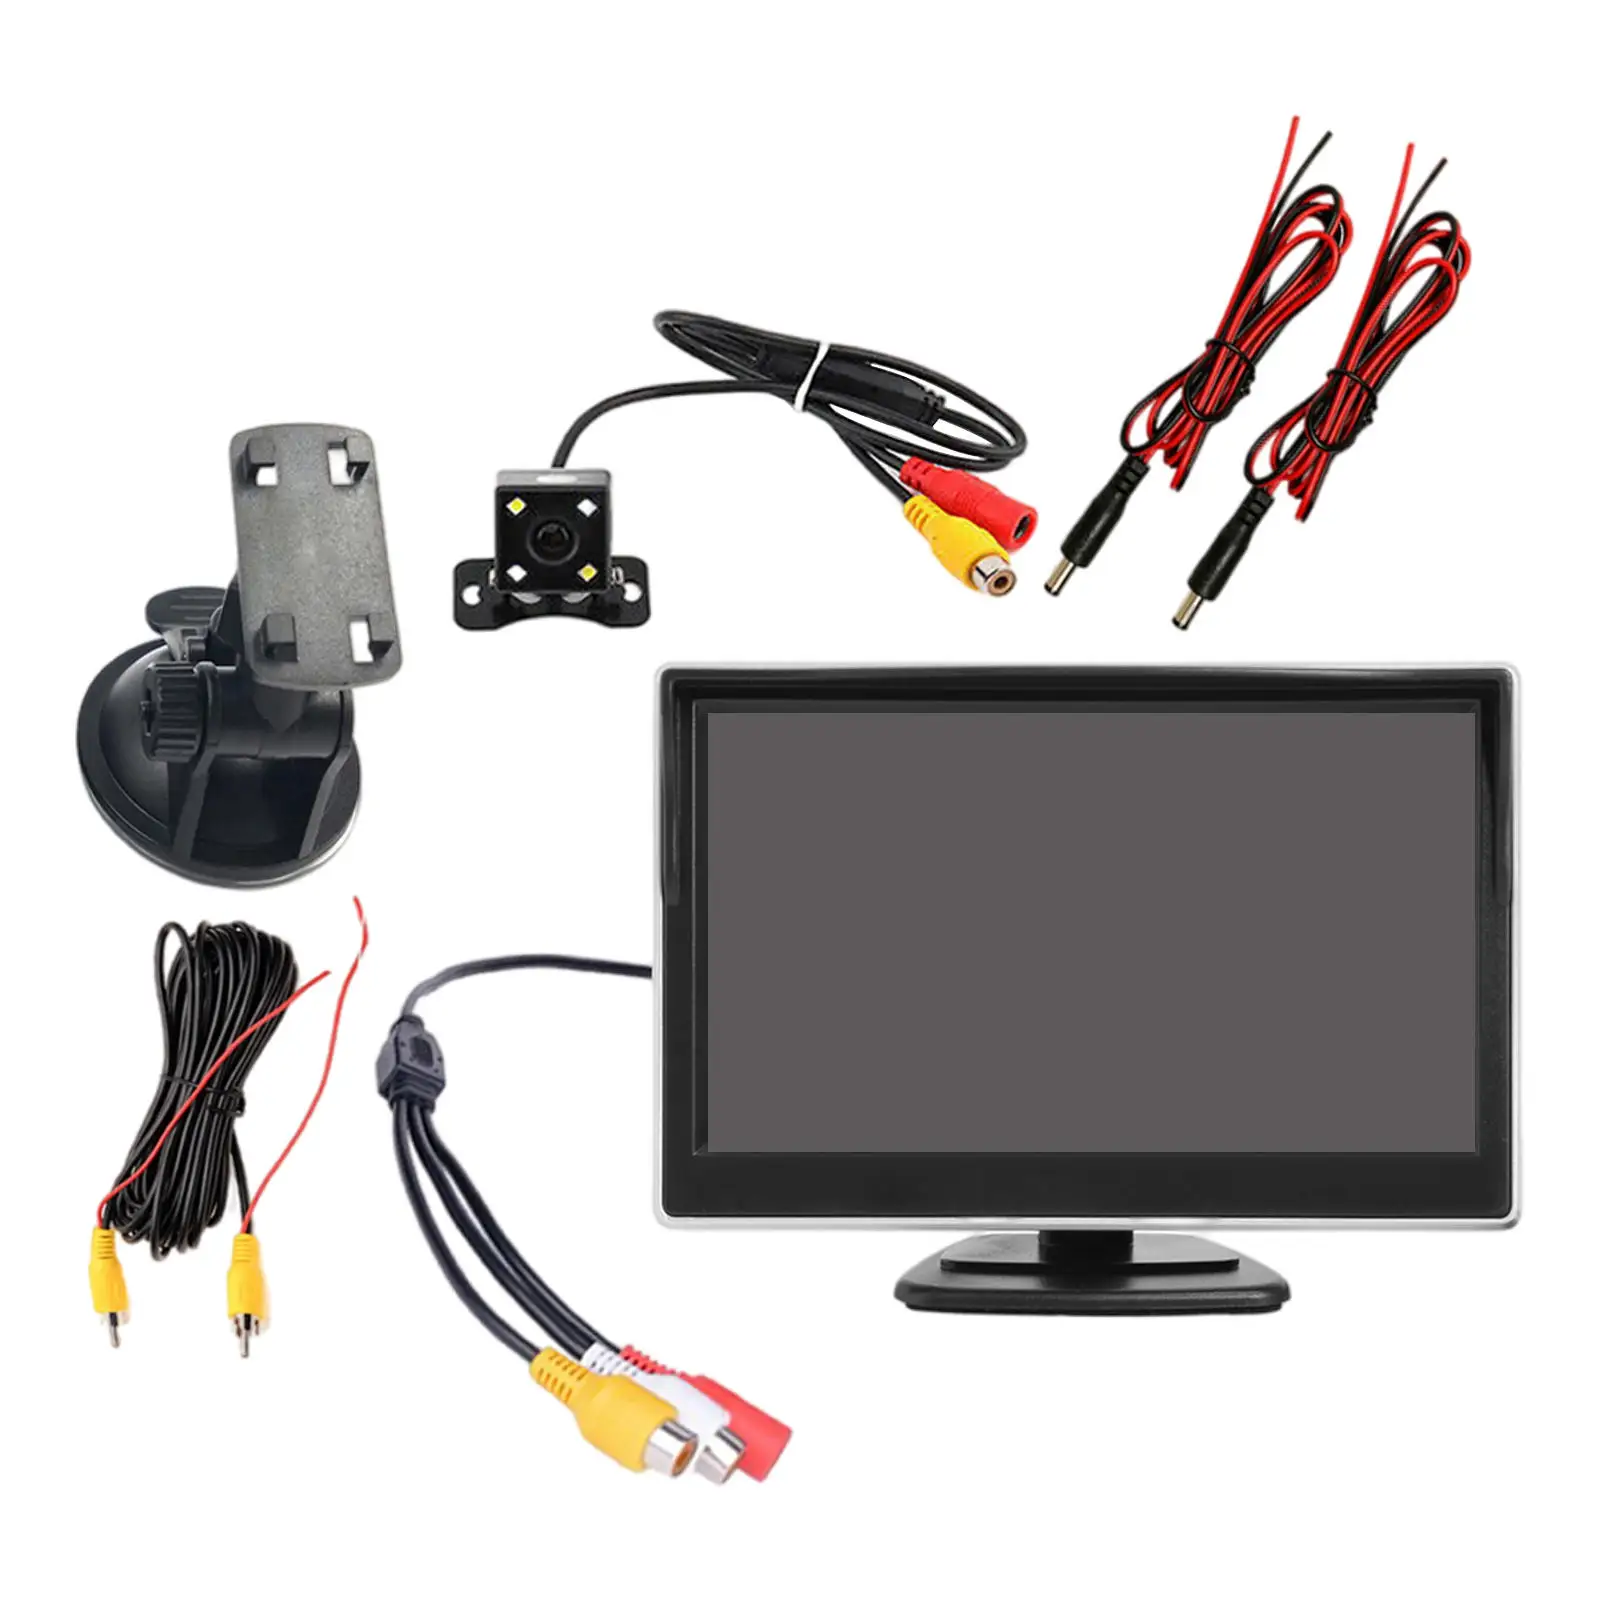 5in 4 LED Car Rear View Camera Monitor Waterproof Monitor Screen System Kit for Truck